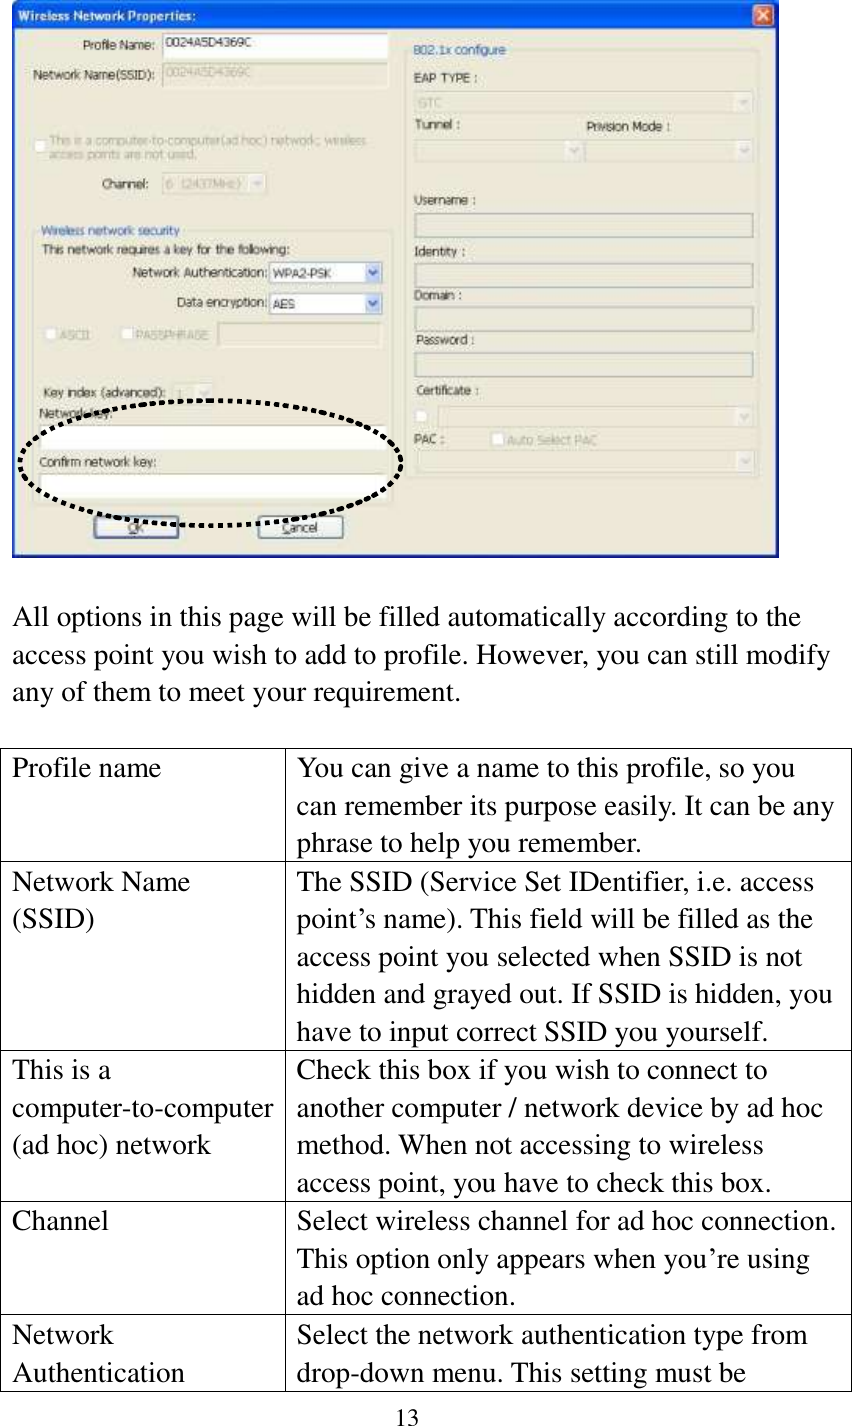 13     All options in this page will be filled automatically according to the access point you wish to add to profile. However, you can still modify any of them to meet your requirement.  Profile name You can give a name to this profile, so you can remember its purpose easily. It can be any phrase to help you remember. Network Name (SSID) The SSID (Service Set IDentifier, i.e. access point’s name). This field will be filled as the access point you selected when SSID is not hidden and grayed out. If SSID is hidden, you have to input correct SSID you yourself. This is a computer-to-computer (ad hoc) network Check this box if you wish to connect to another computer / network device by ad hoc method. When not accessing to wireless access point, you have to check this box. Channel Select wireless channel for ad hoc connection. This option only appears when you’re using ad hoc connection. Network   Authentication Select the network authentication type from drop-down menu. This setting must be 